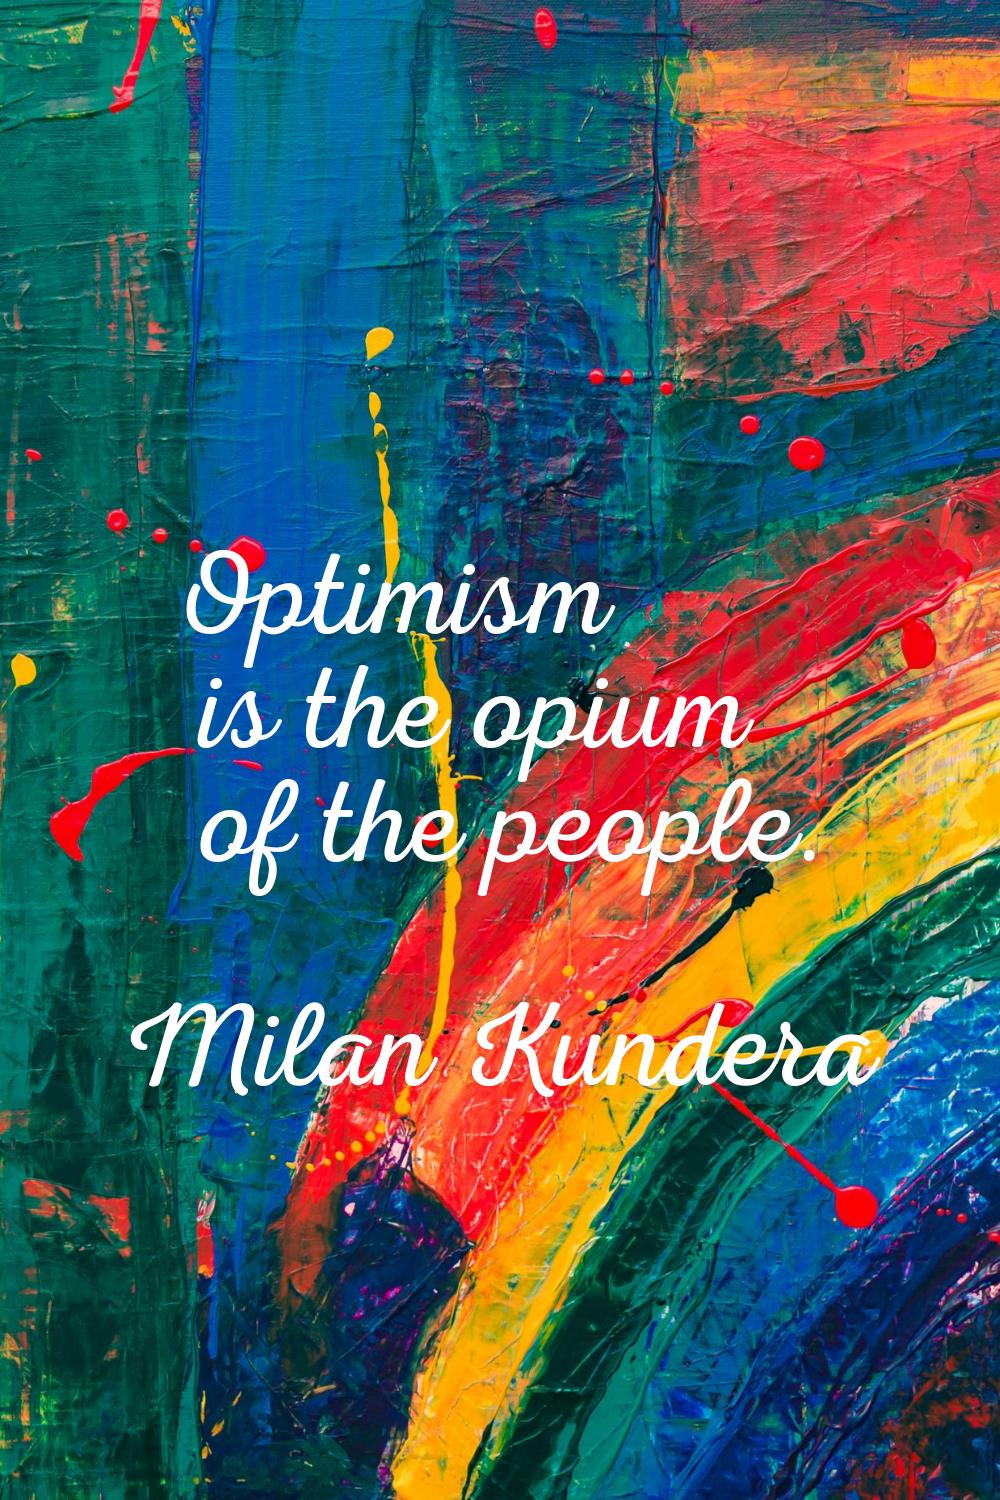 Optimism is the opium of the people.